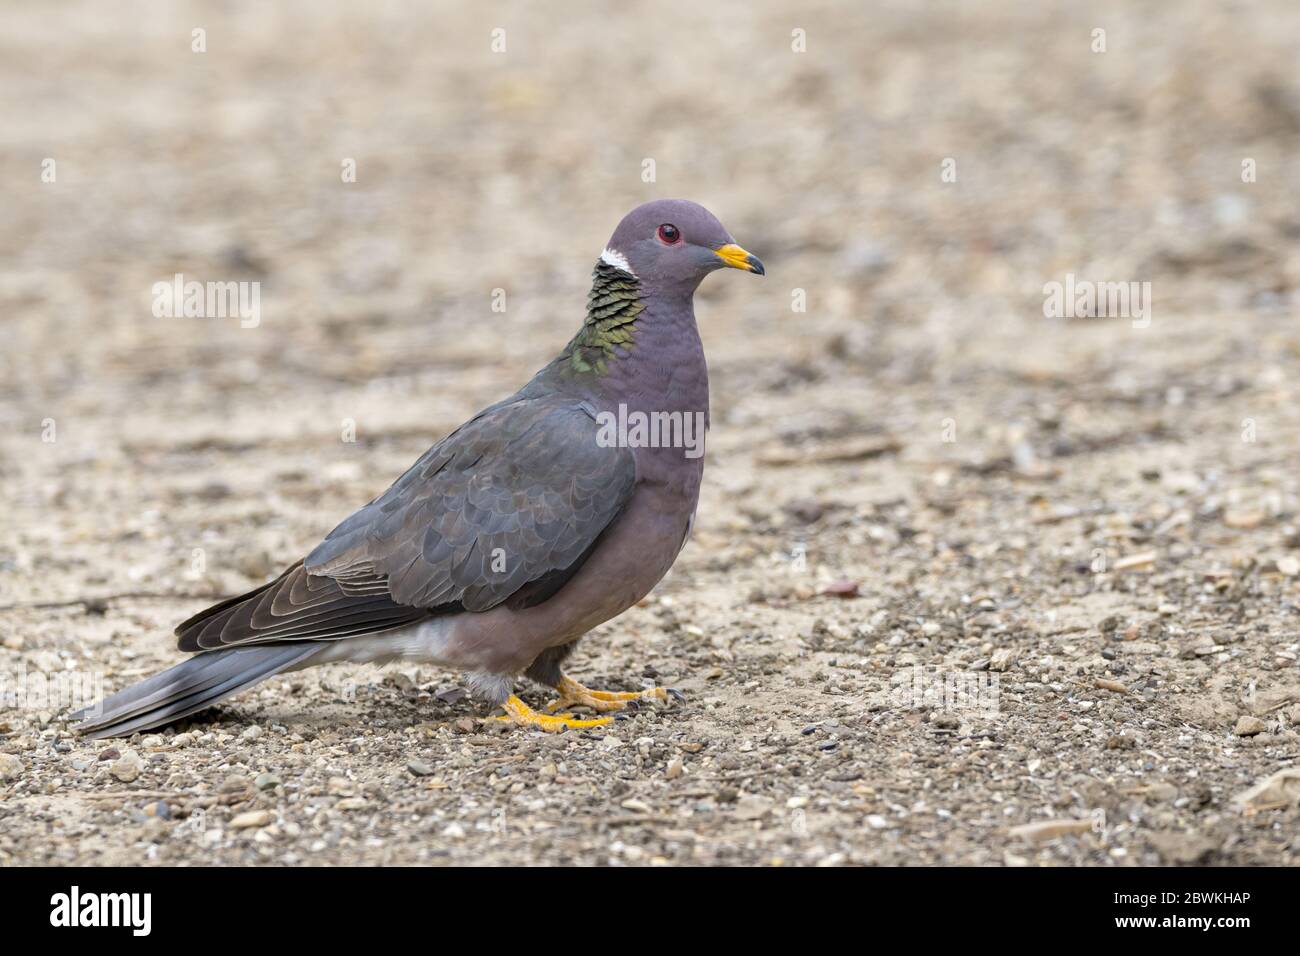 Die-offs of band-tailed pigeons connected to newly discovered parasite